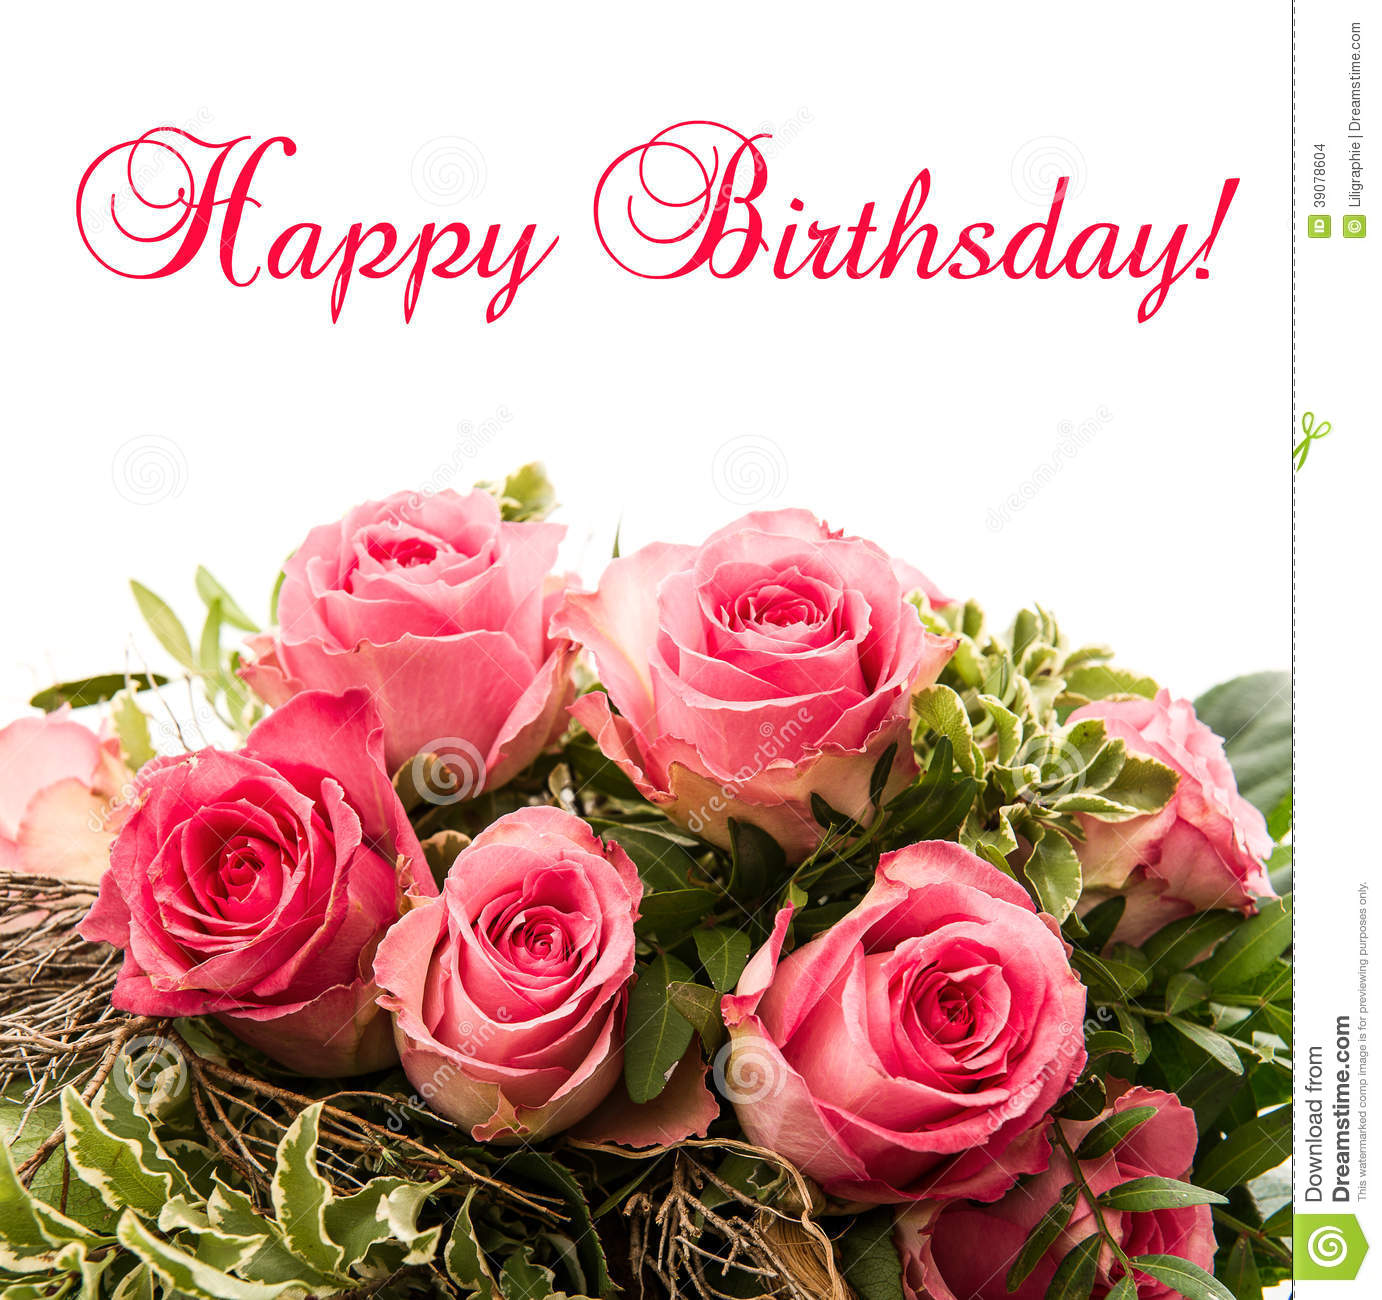 Happy Birthday Flowers Wallpapers | The Art Mad Wallpapers